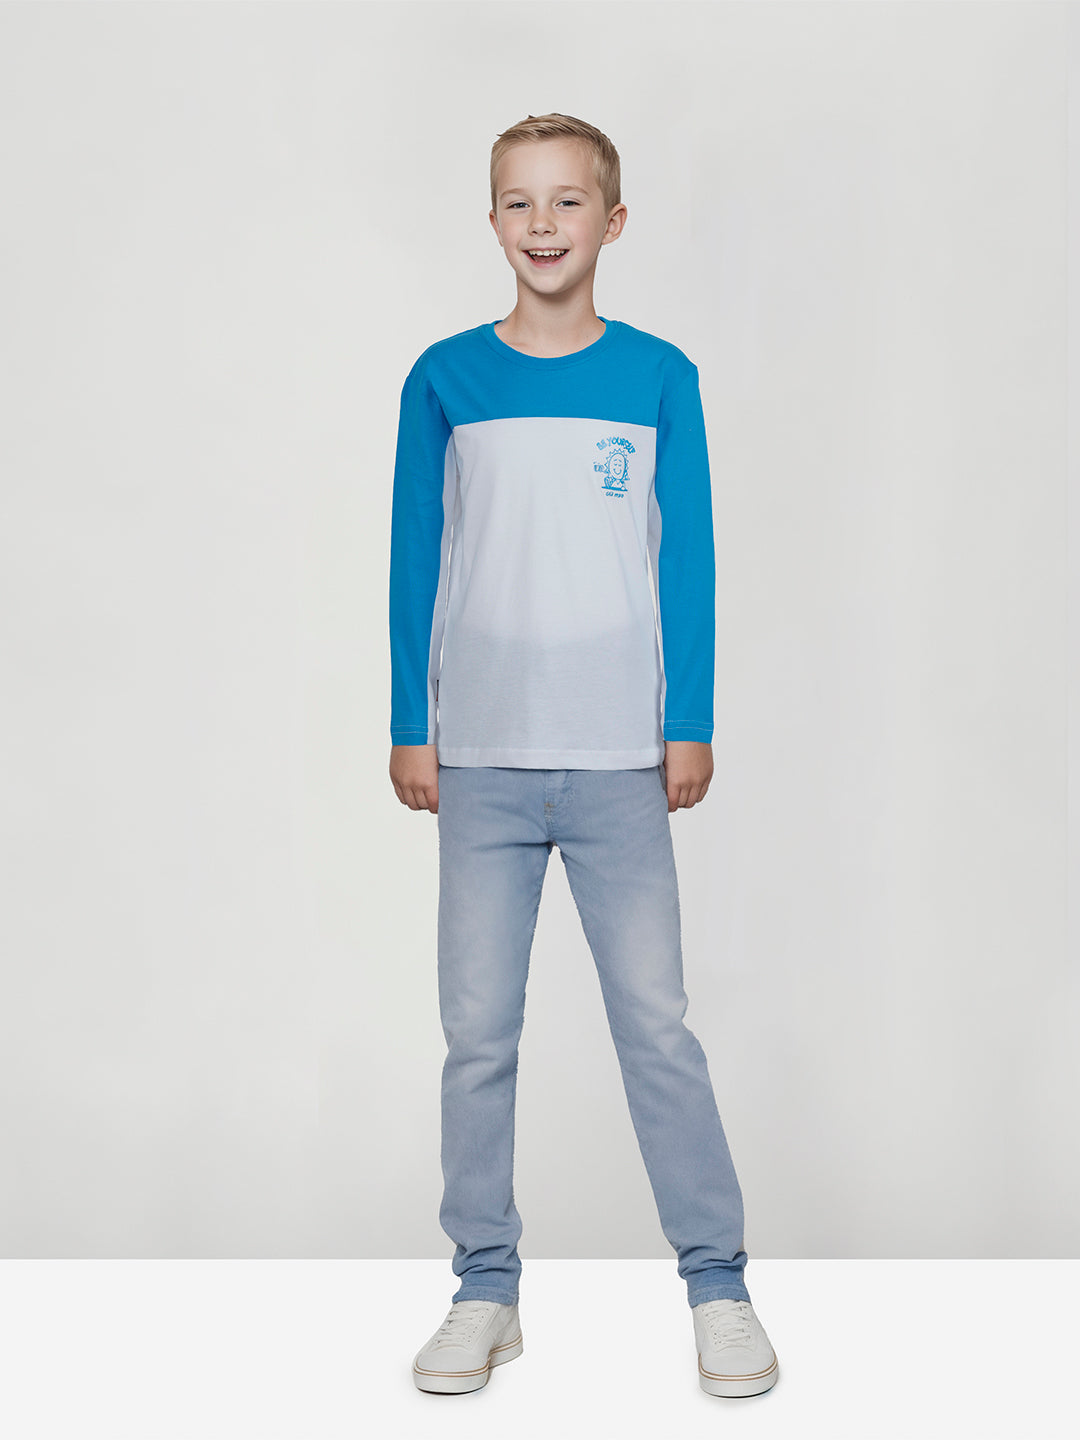 Boys blue round neck knitted cotton printed t-shirt.